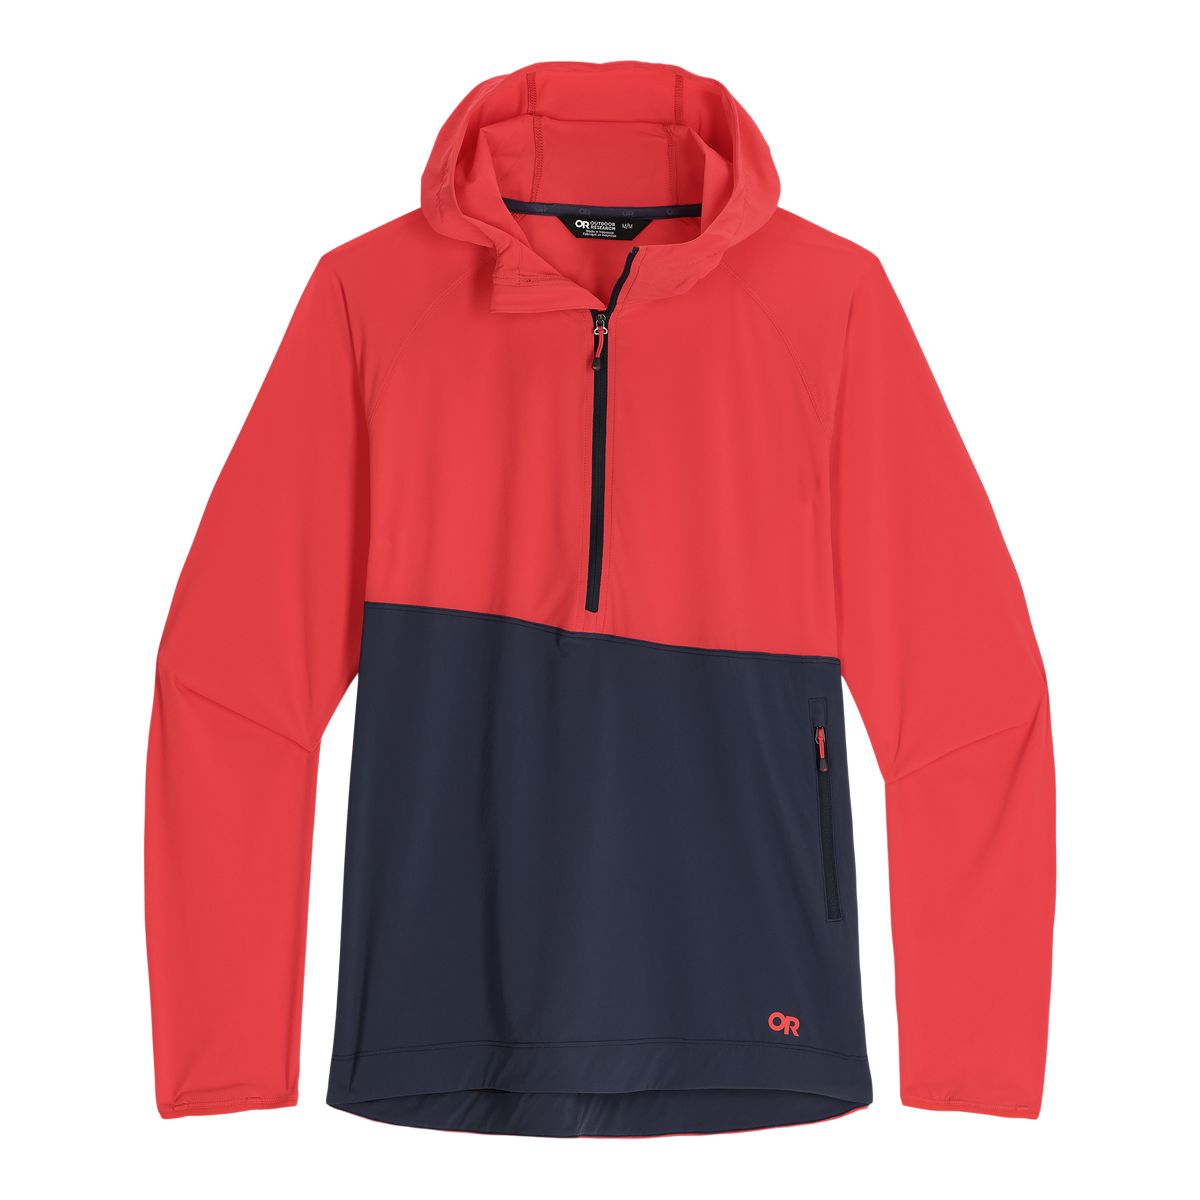 https://media-www.atmosphere.ca/product/div-03-softgoods/dpt-70-athletic-clothing/sdpt-02-womens/334142992/outdoor-research-women-s-astroman-sun-hoodie-b7807cd4-d5f1-432a-8ca0-33f175f01d22-jpgrendition.jpg?imdensity=1&imwidth=1244&impolicy=mZoom